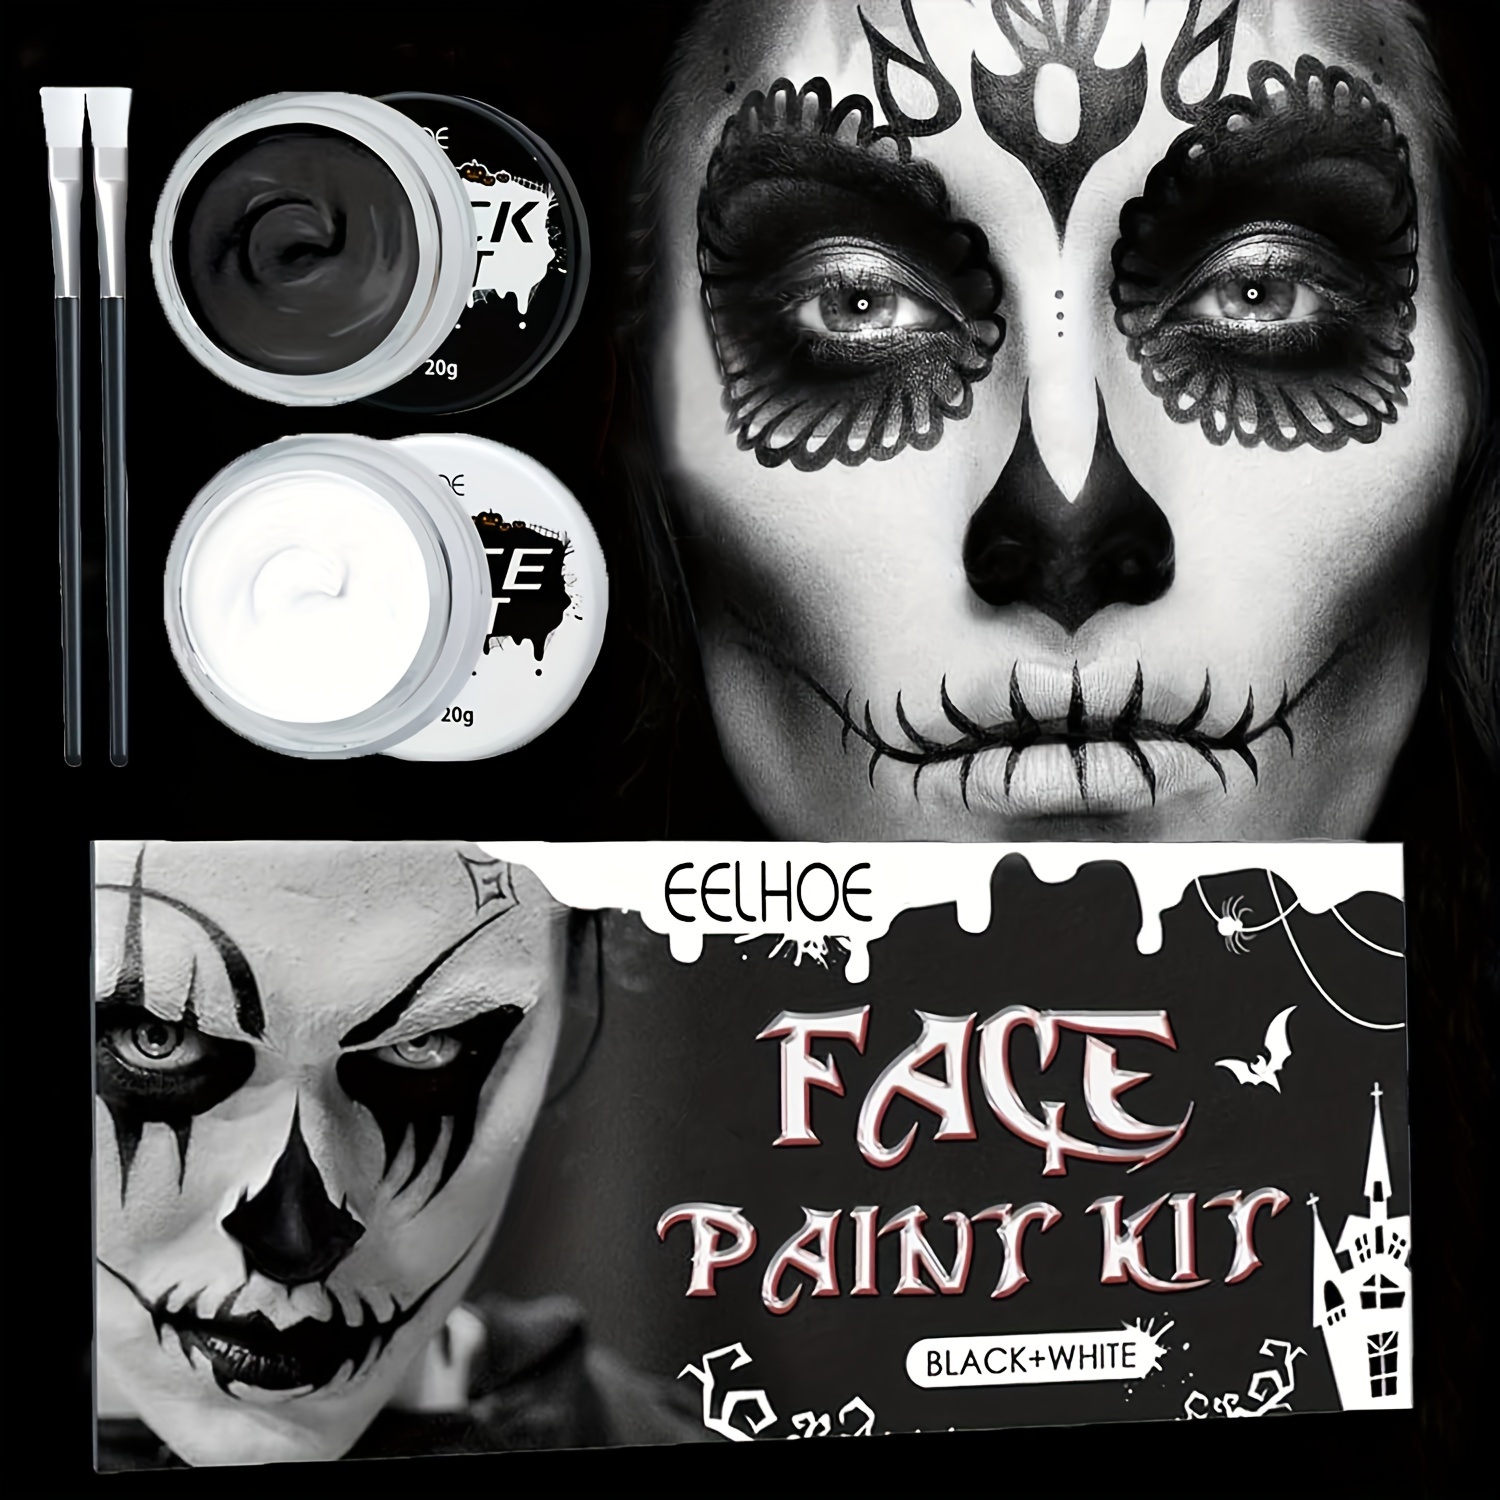 Black White Face Paint Body Painting, 2 PCS Pro White+Black Face Body Paint  Oil Based Cream Palette Kit for Art Theater Halloween Party Cosplay Clown